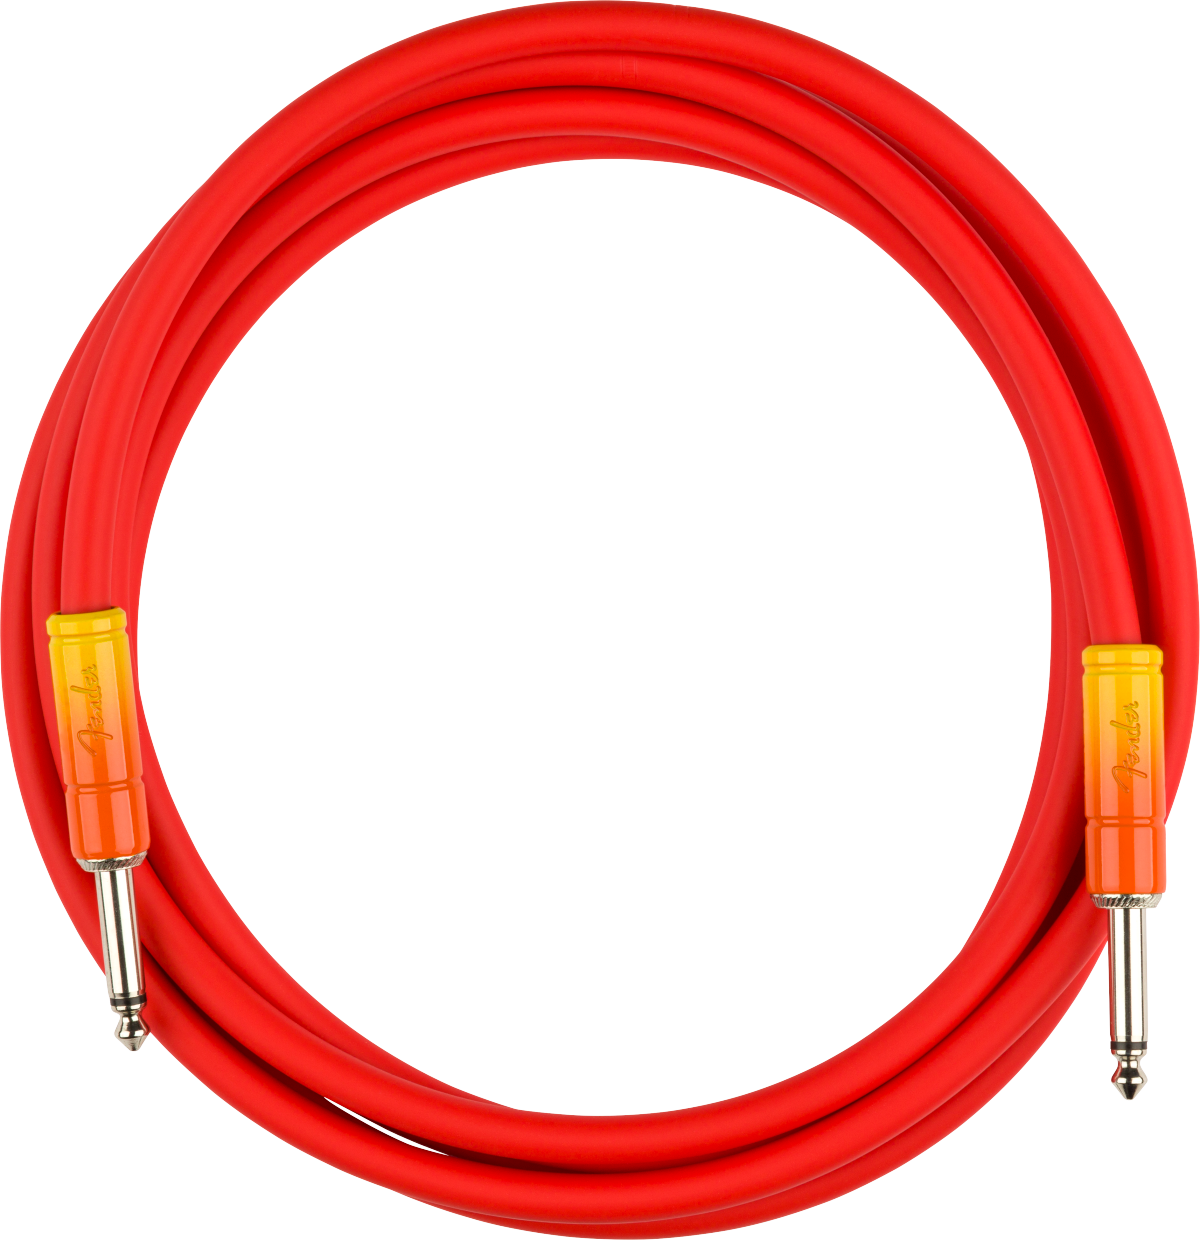 Guitar Cable - Instrument Cables